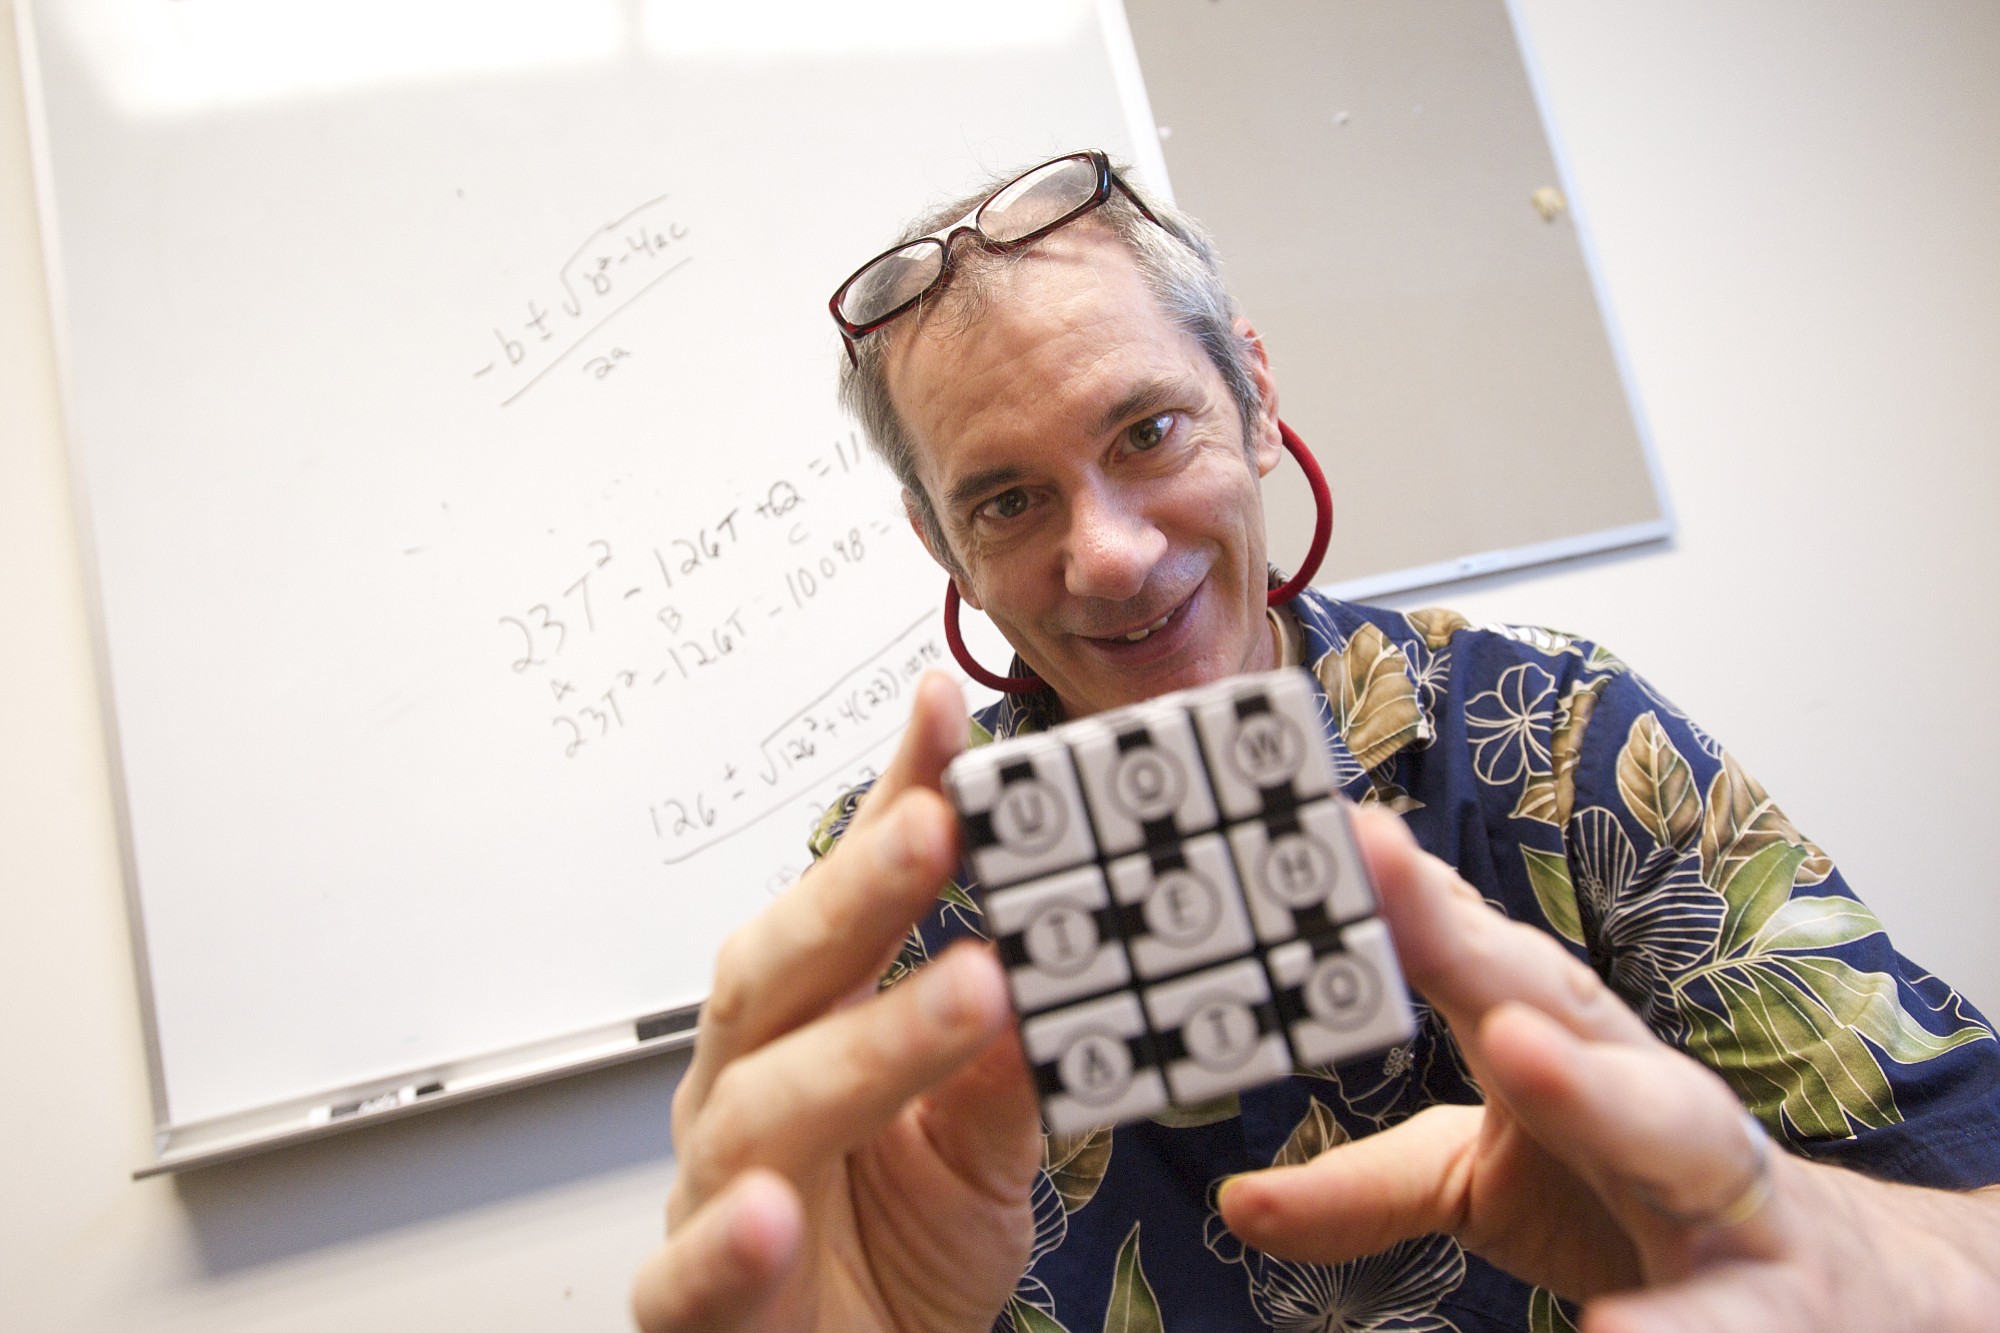 Thomas Gazzola holds a modified Rubik's cube his team decoded on their way to winning the Massachusetts Institute of Technology's Mystery Hunt 2015, considered to be one of the toughest challenges of its kind in the world.